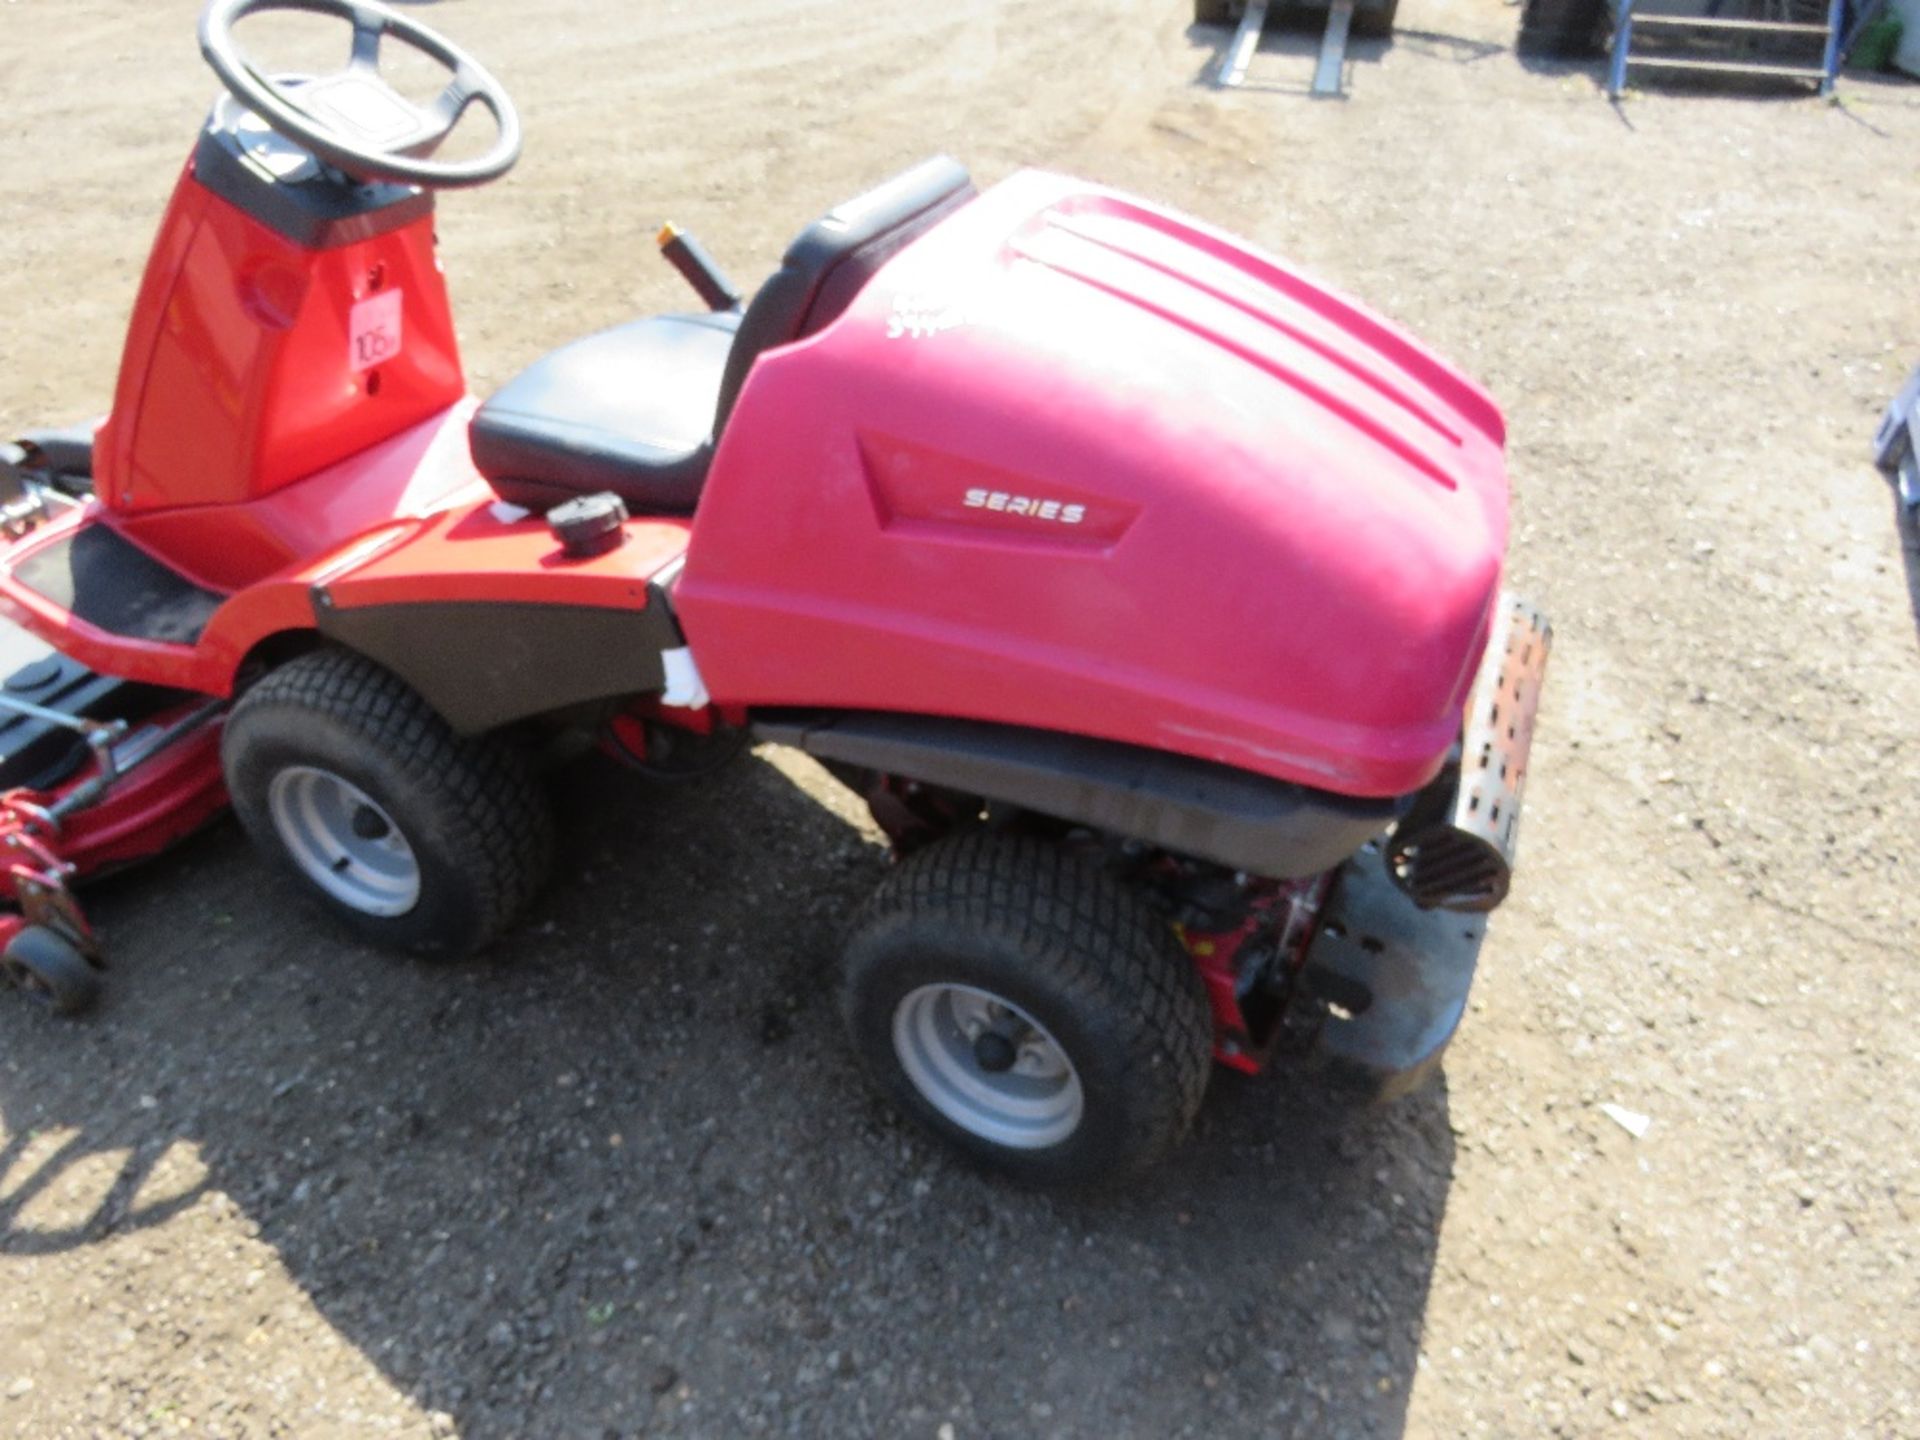 COUNTAX 4WD RIDE ON MOWER WITH OUTFRONT DECK, 394 REC HOURS, 25HP ENGINE. FINE ELECTRIC ADJUSTMENT O - Image 4 of 7